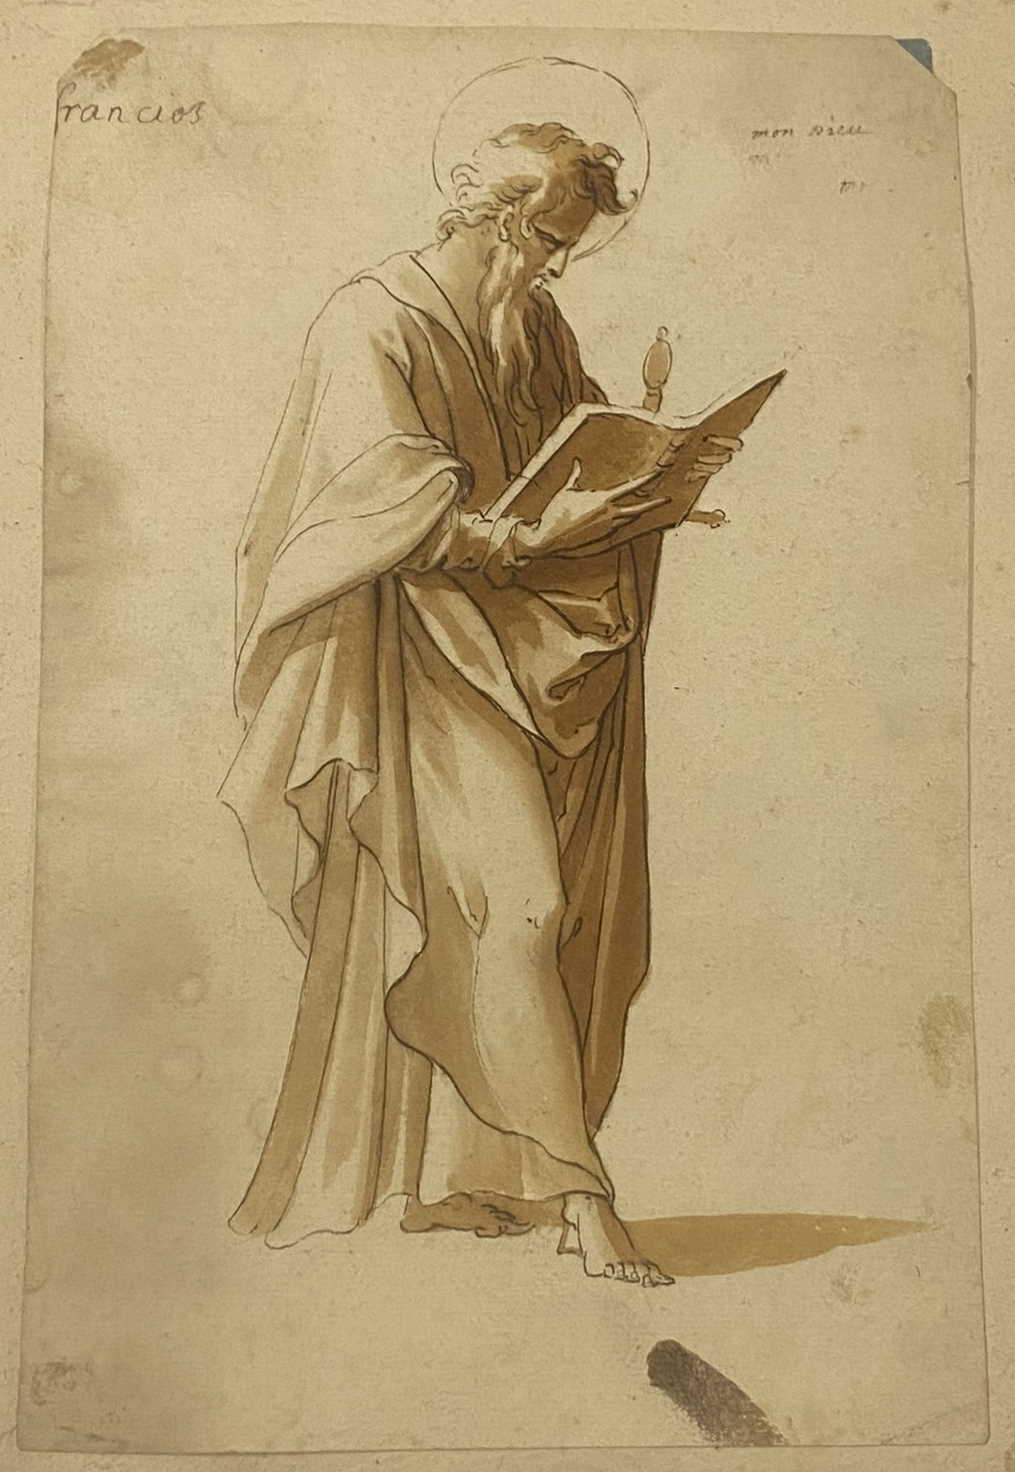 A 17th/18th century drawing of St Francis ?